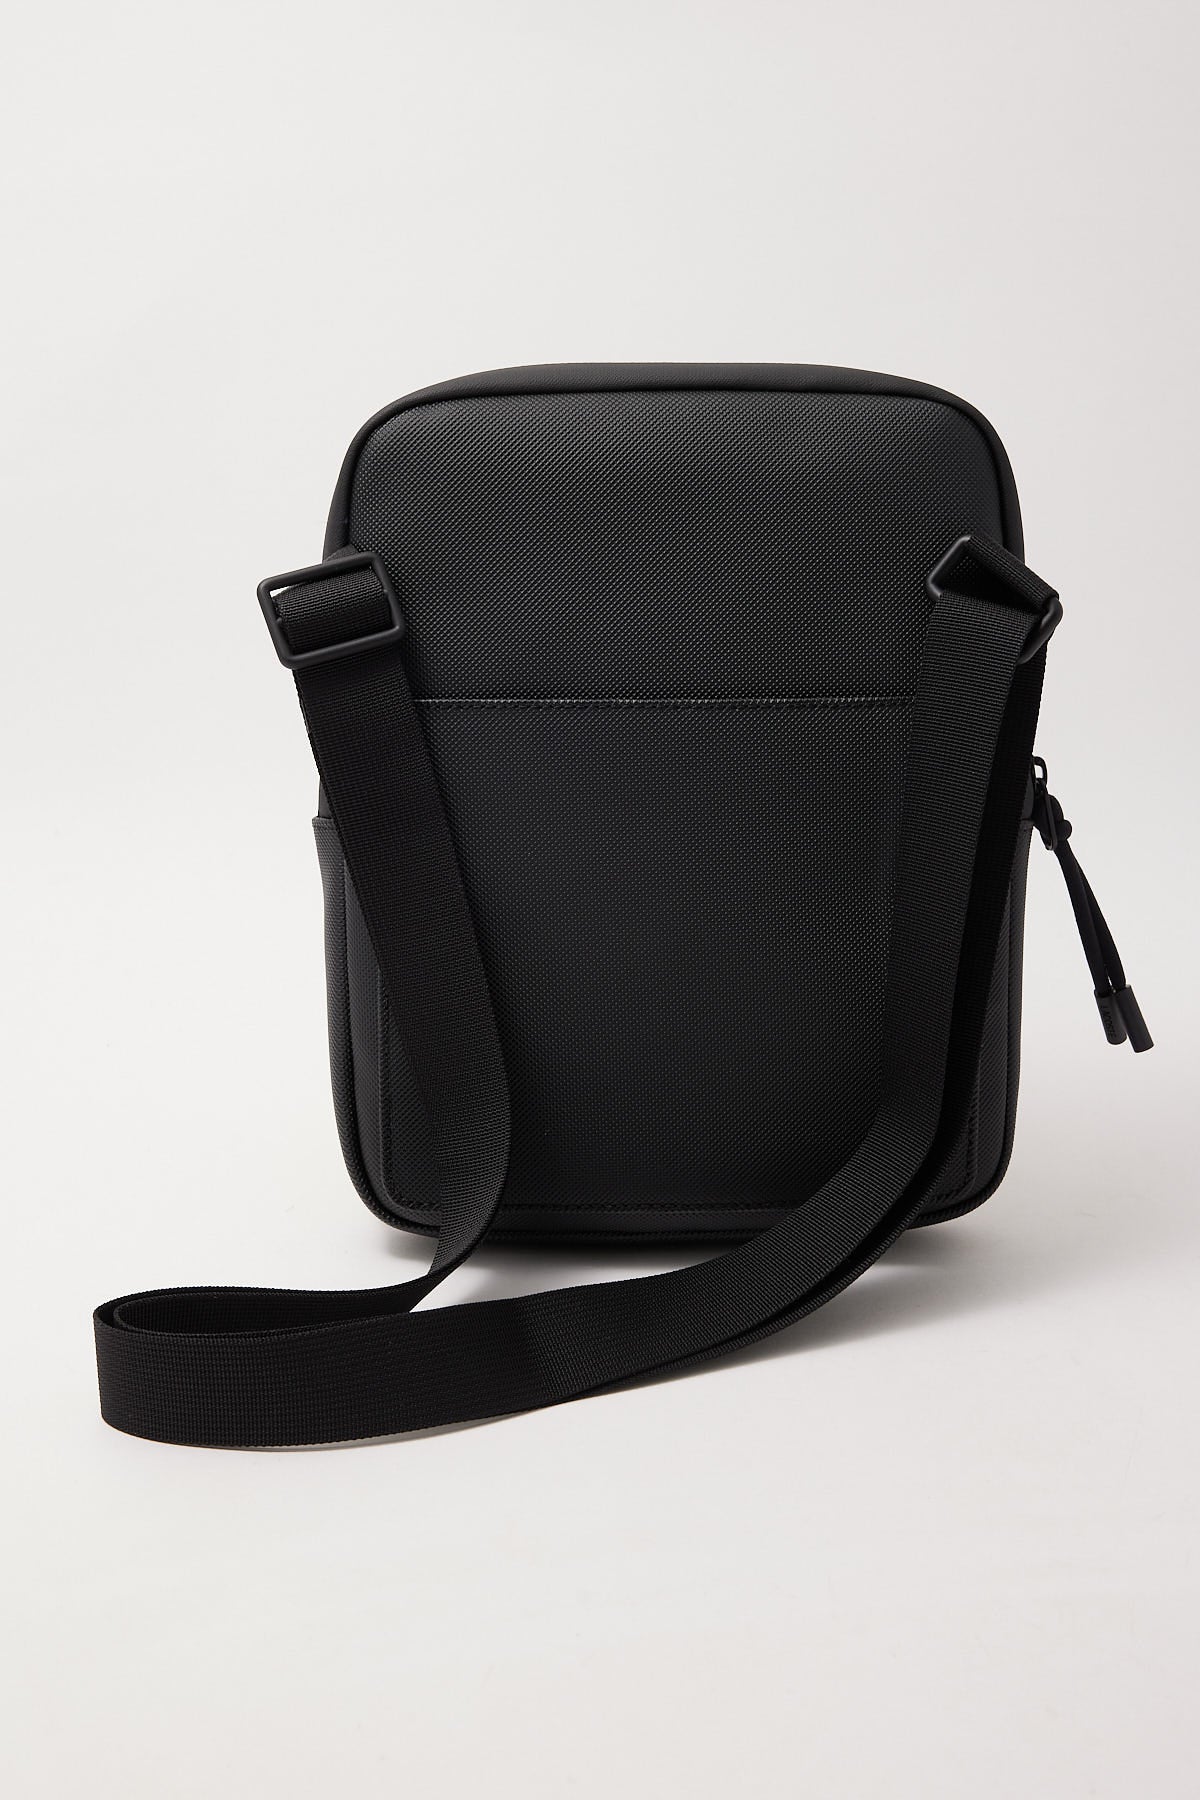 Lacoste LCST M Flat Crossover Bag Black